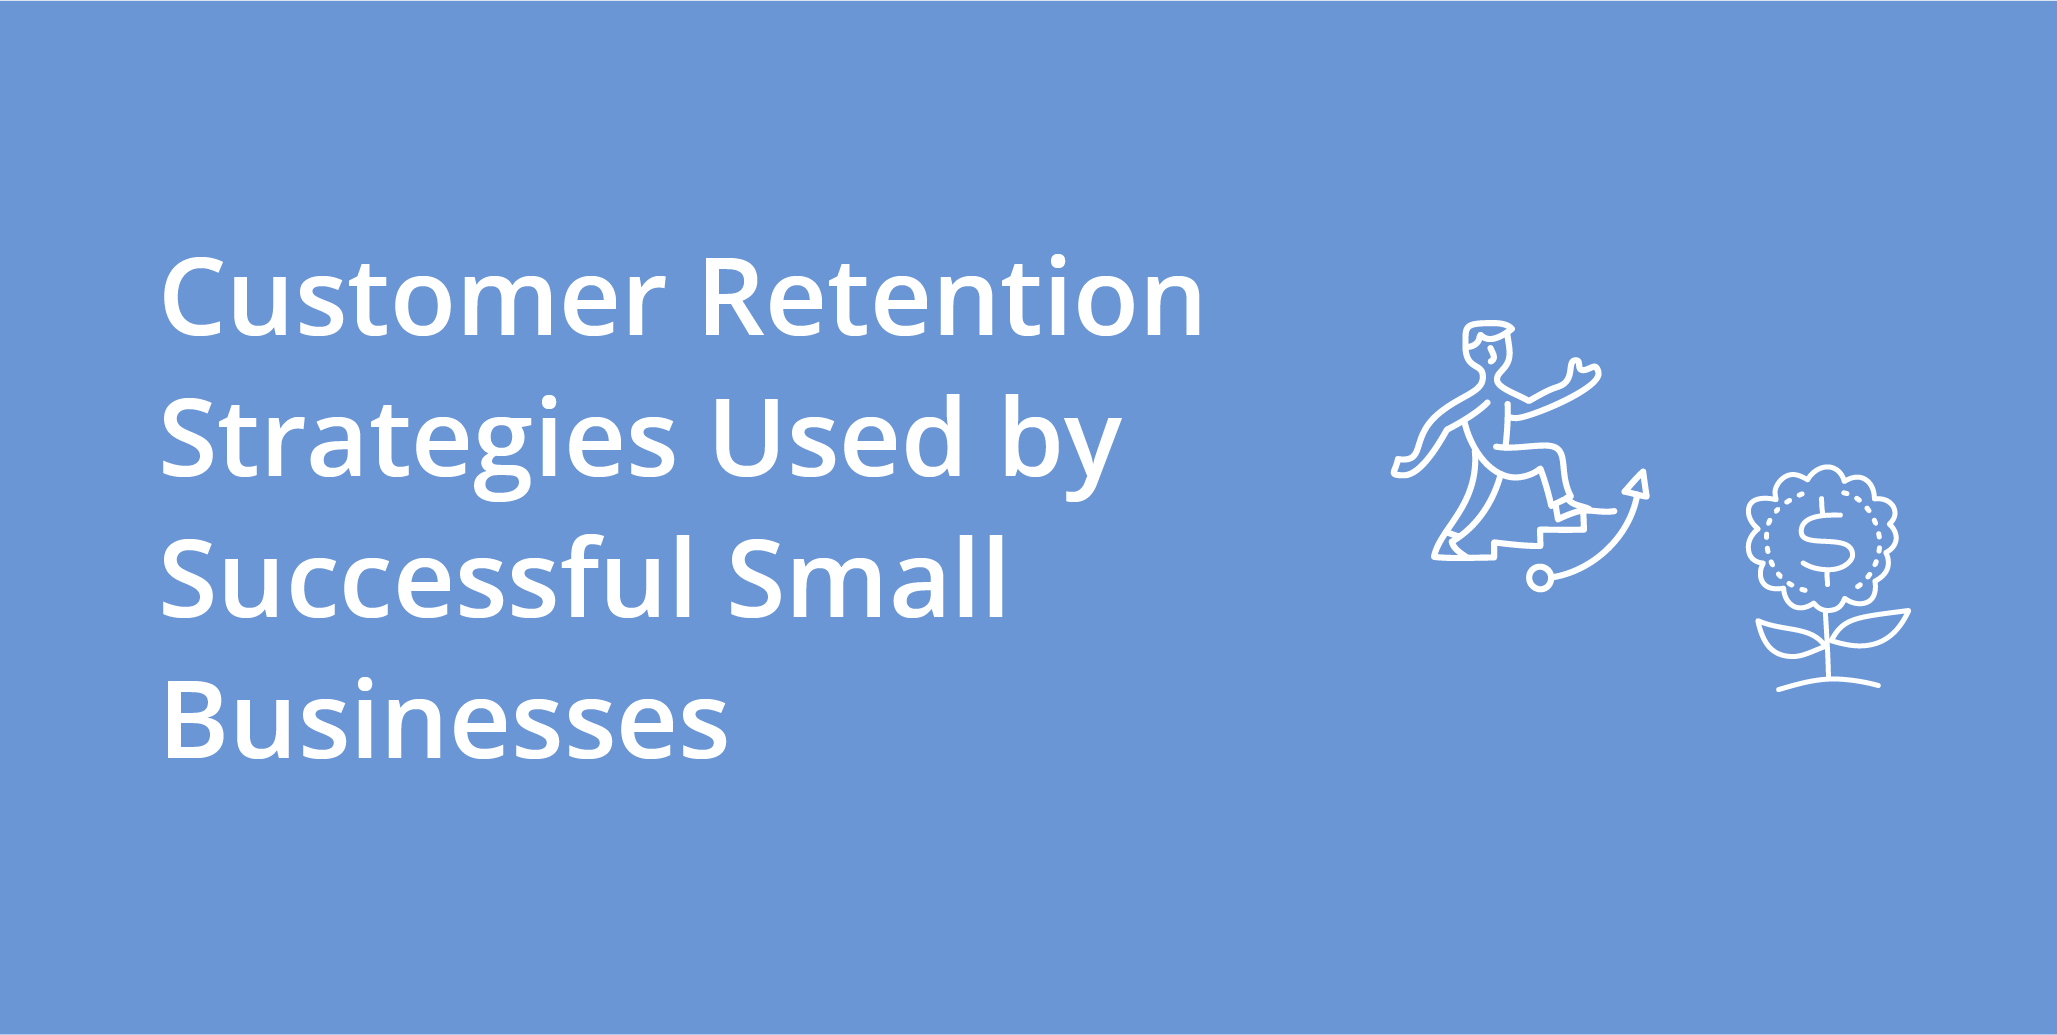 Customer Retention Strategies Used by Successful Small Businesses  | Telephones for business